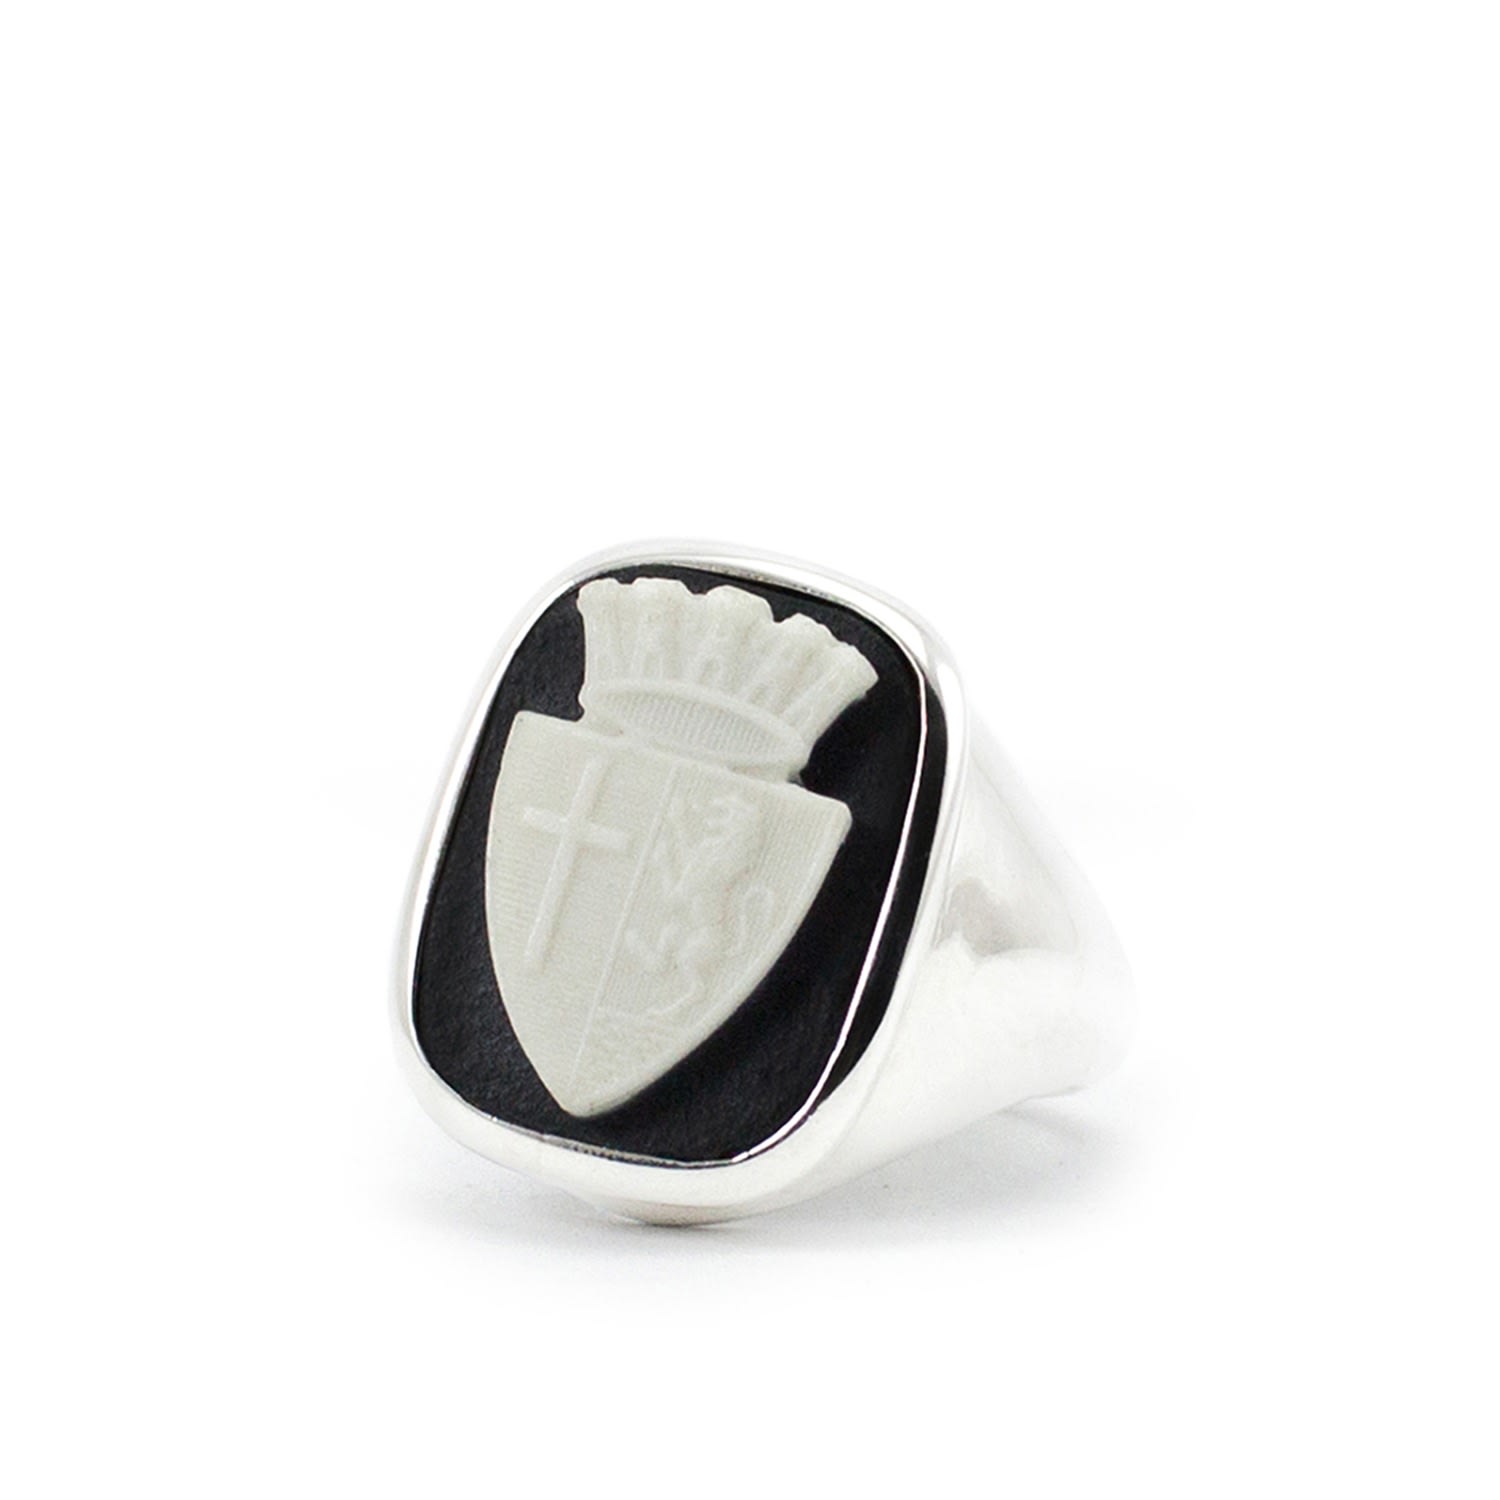 Men's Silver Insignia Cameo Signet Ring Vintouch Italy